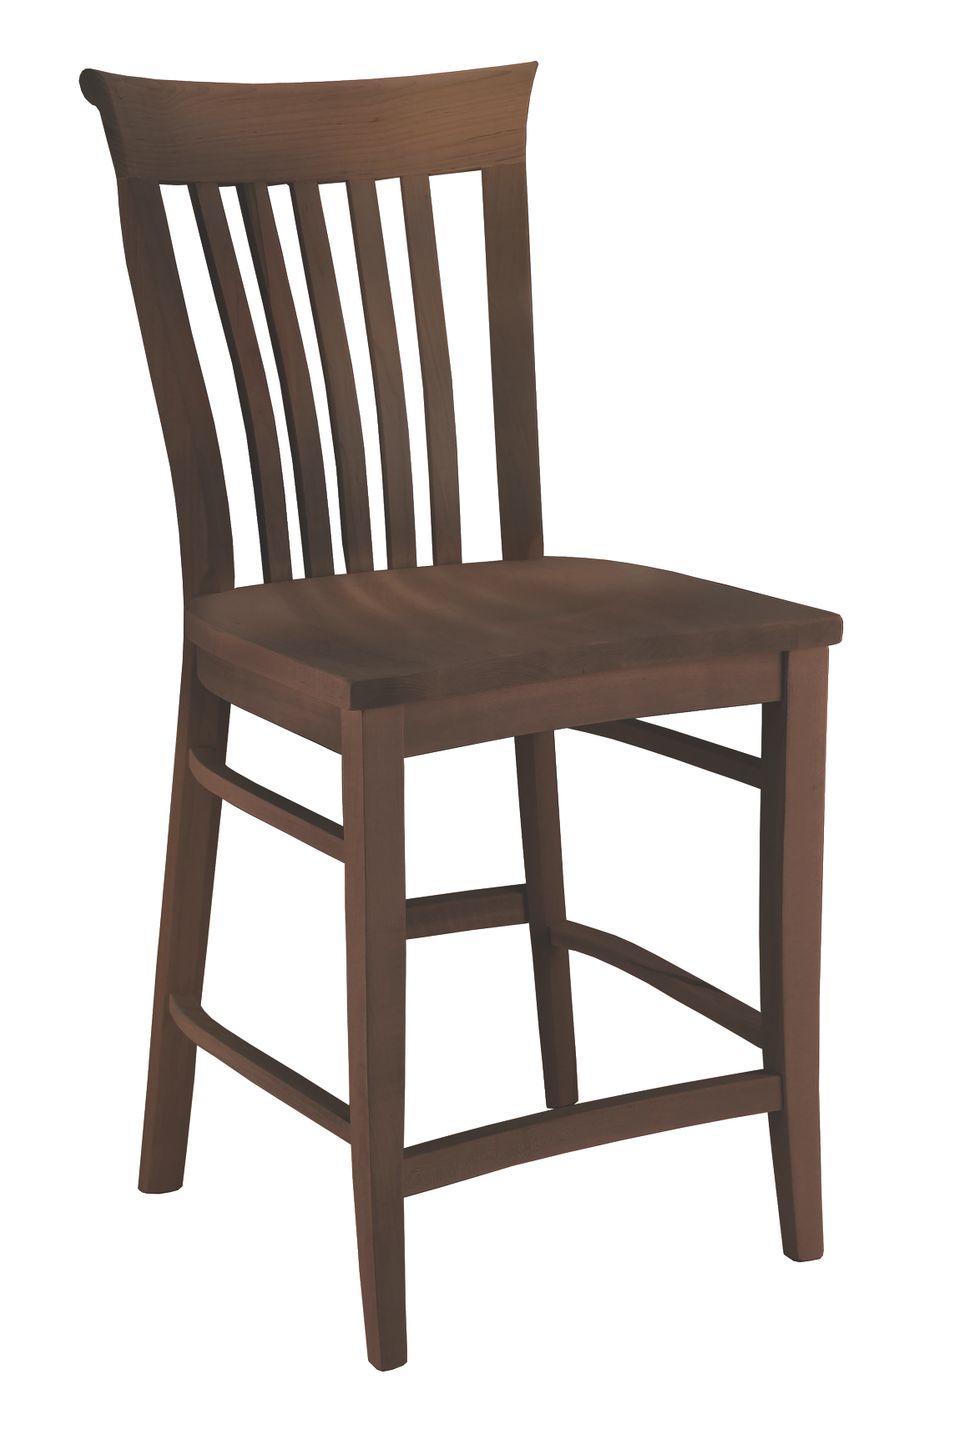 Cd clayton counter chair 11724